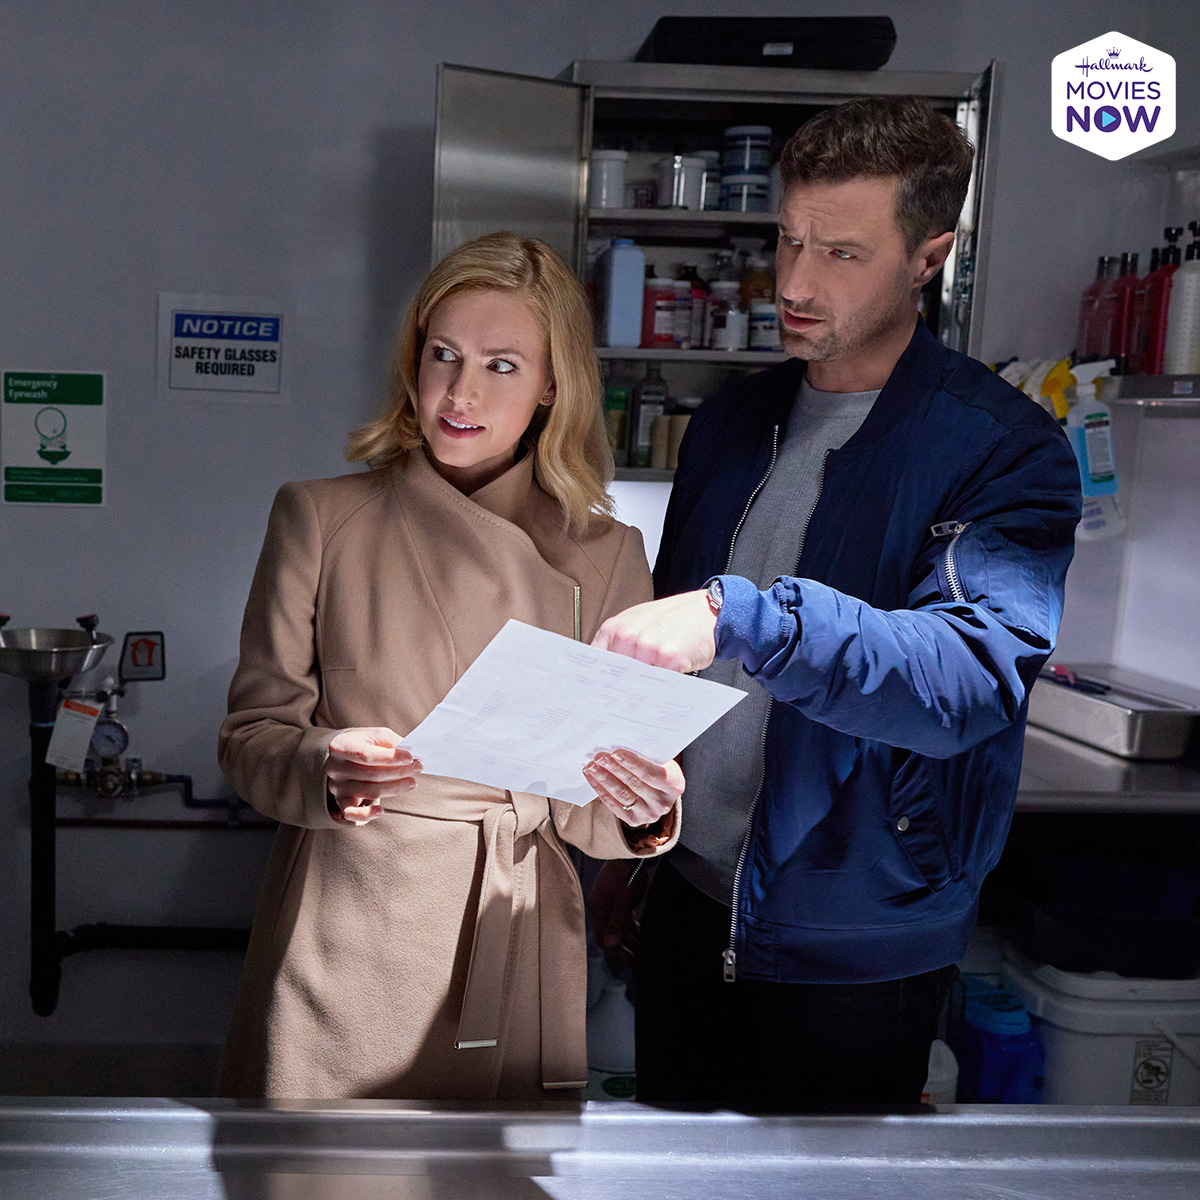 How does a healthy man end up dead? Find out in the All New Hallmark Original, #FamilyPracticeMysteries: Coming Home starring @amandaschull and @BrendanJPenny now streaming on #HallmarkMoviesNow! #Chessies #Sleuthers